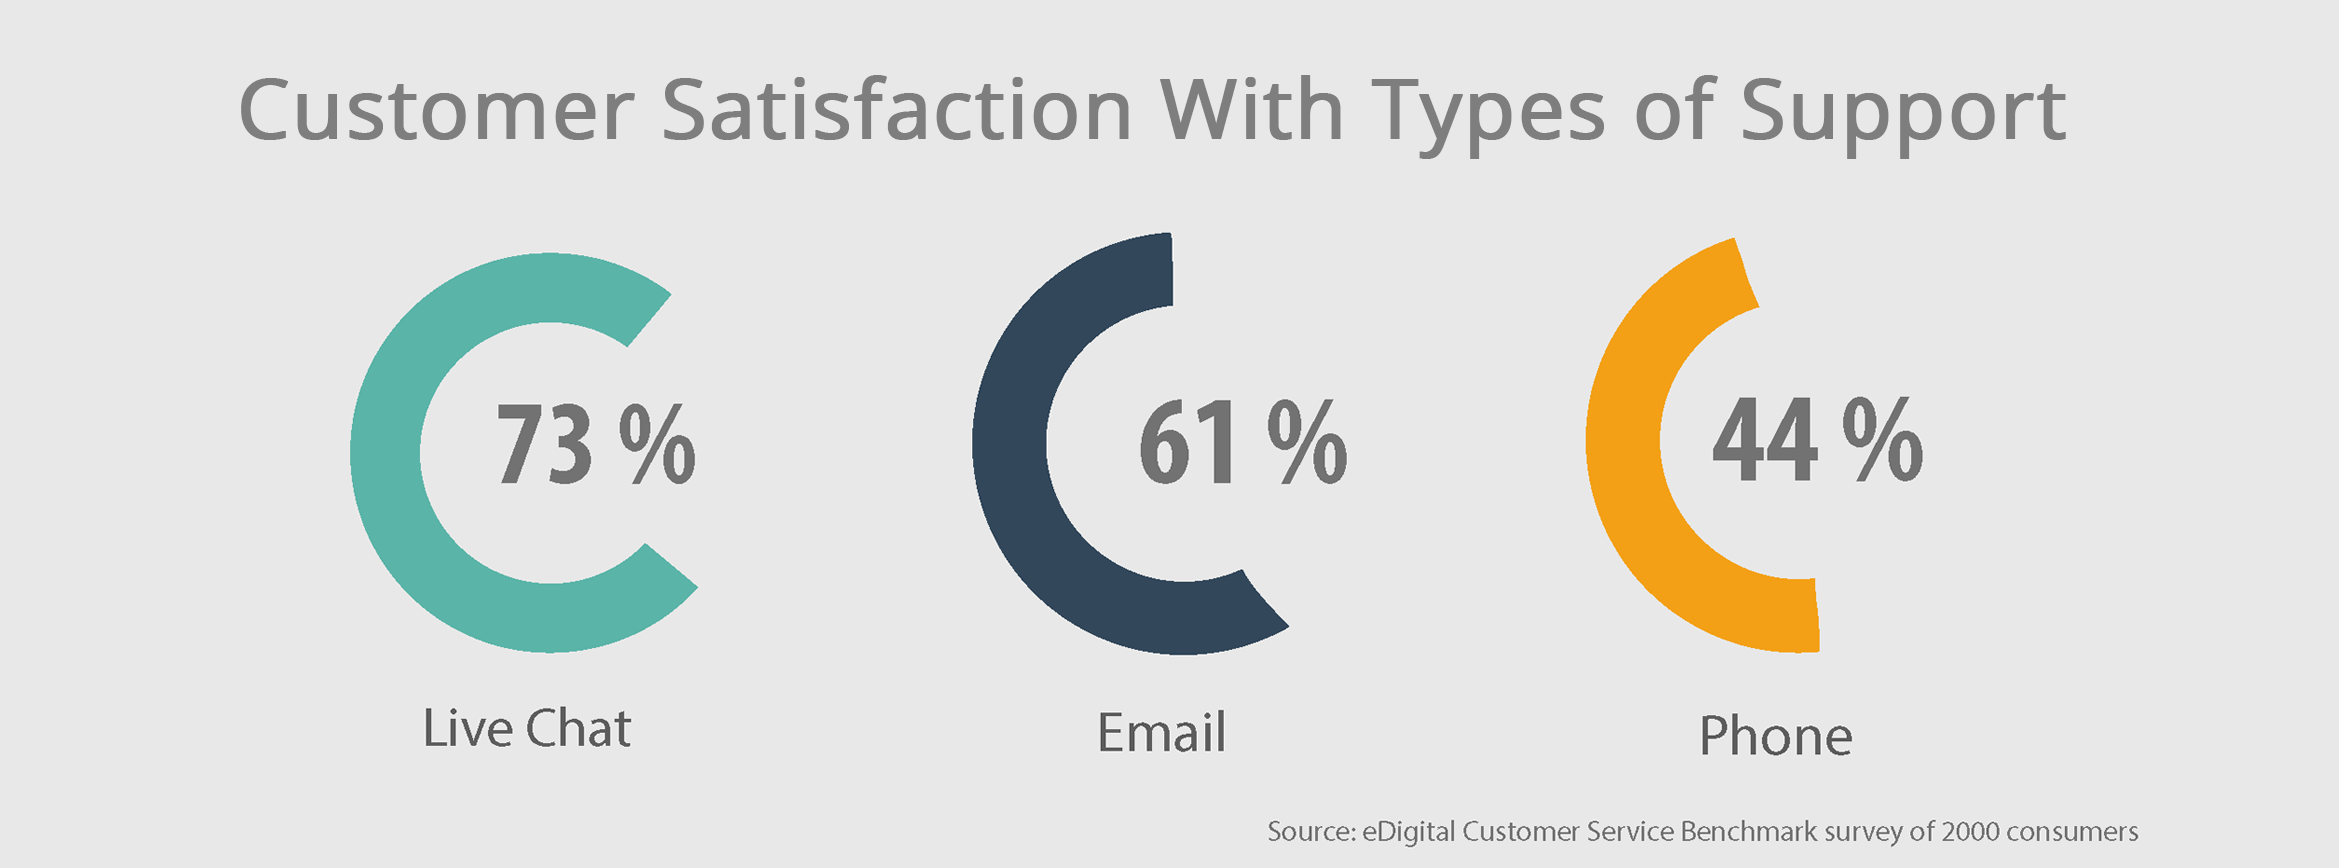 Customer Satisfaction With Types of Support